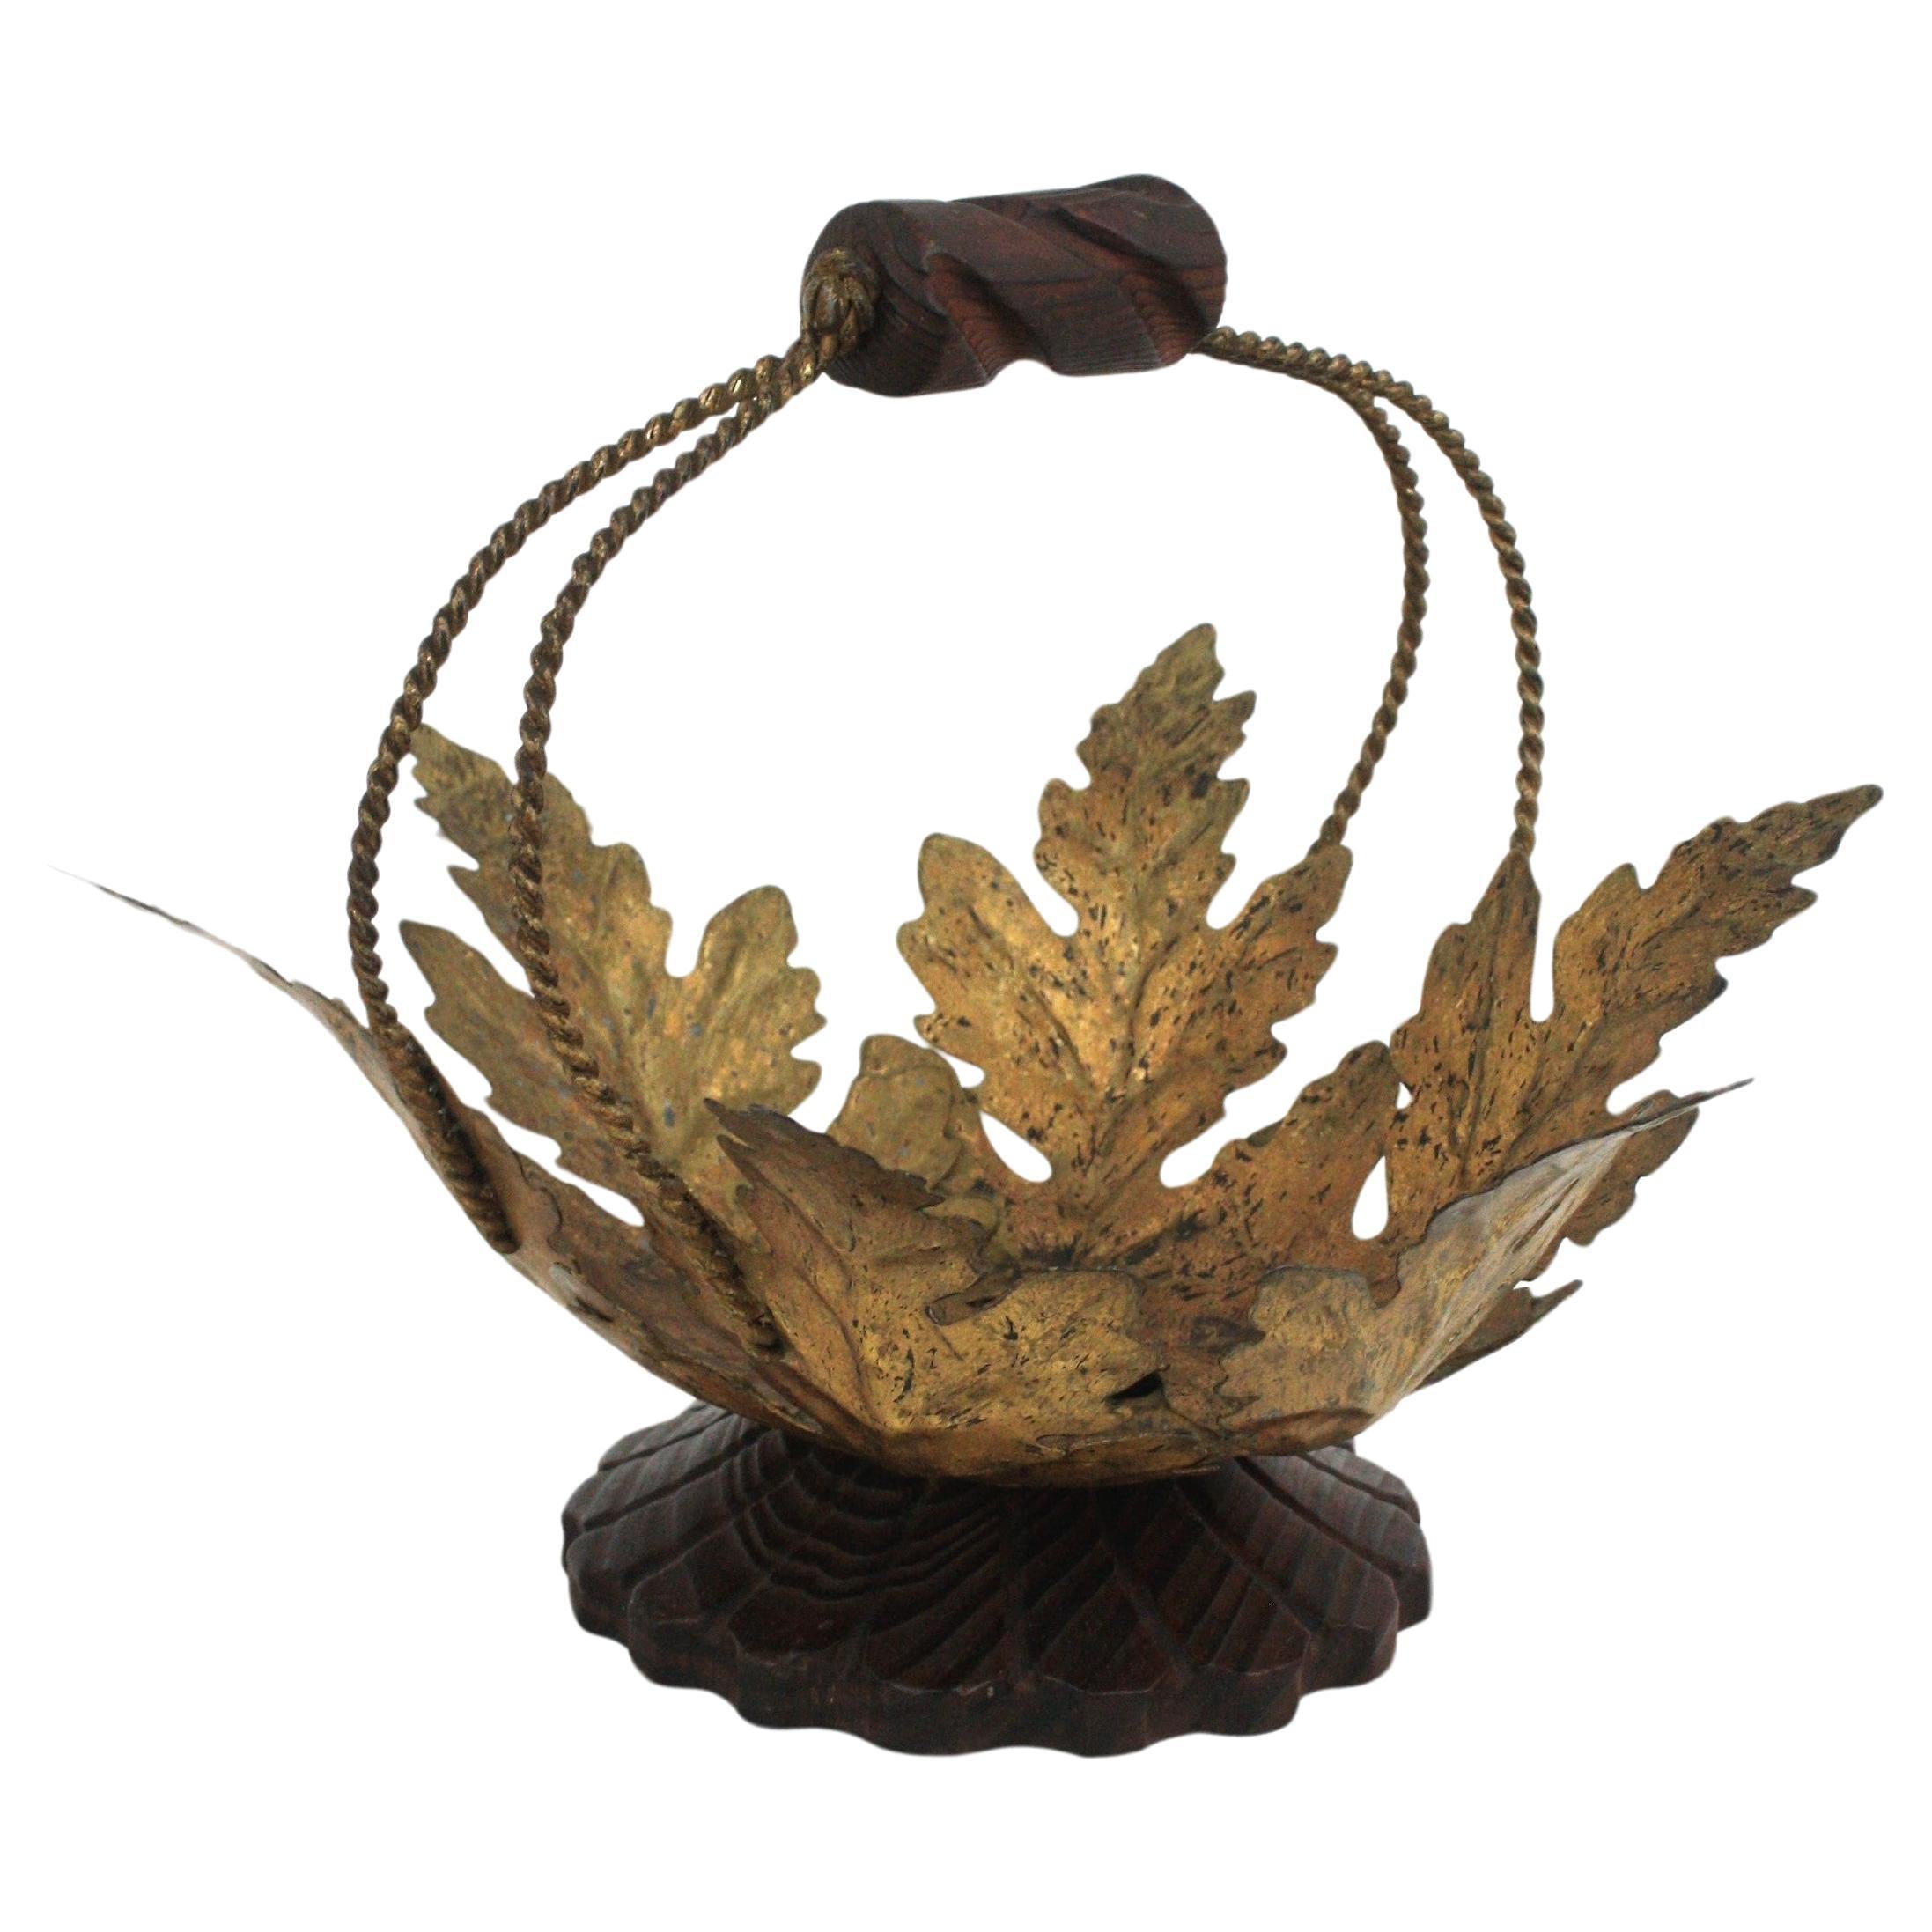 Mid-Century Modern gilt iron and carved wood basket centerpiece / fruit bowl, 1950s-1960s
Handcrafted in Spain at the Mid-20th century period in the style of Spanish Colonial. 
Eye-catching centerpiece featuring gilt iron leaves standing on a carved